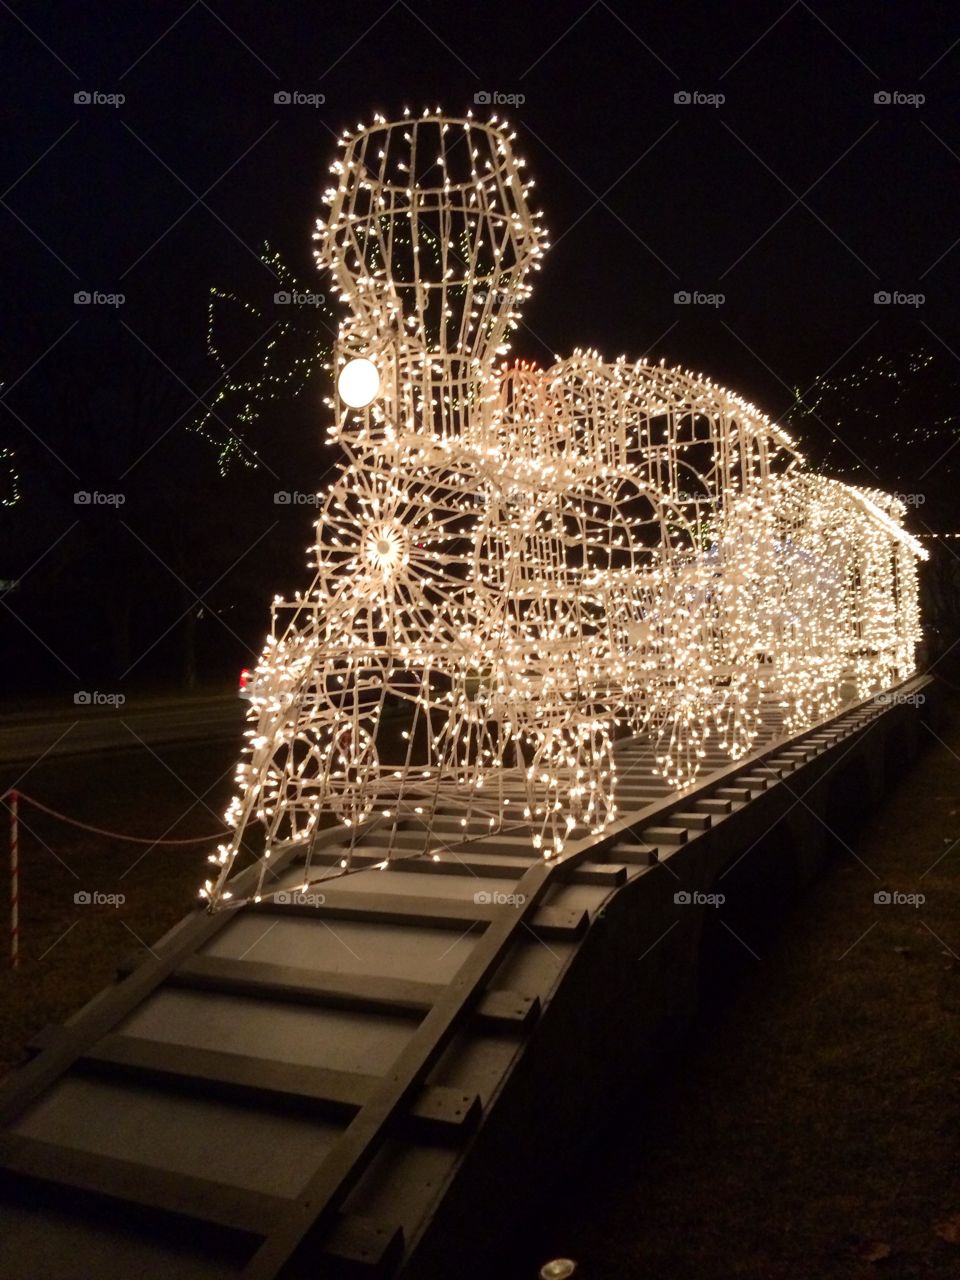 Train of lights . A train made out of Christmas lights at a park in Arlington heights il